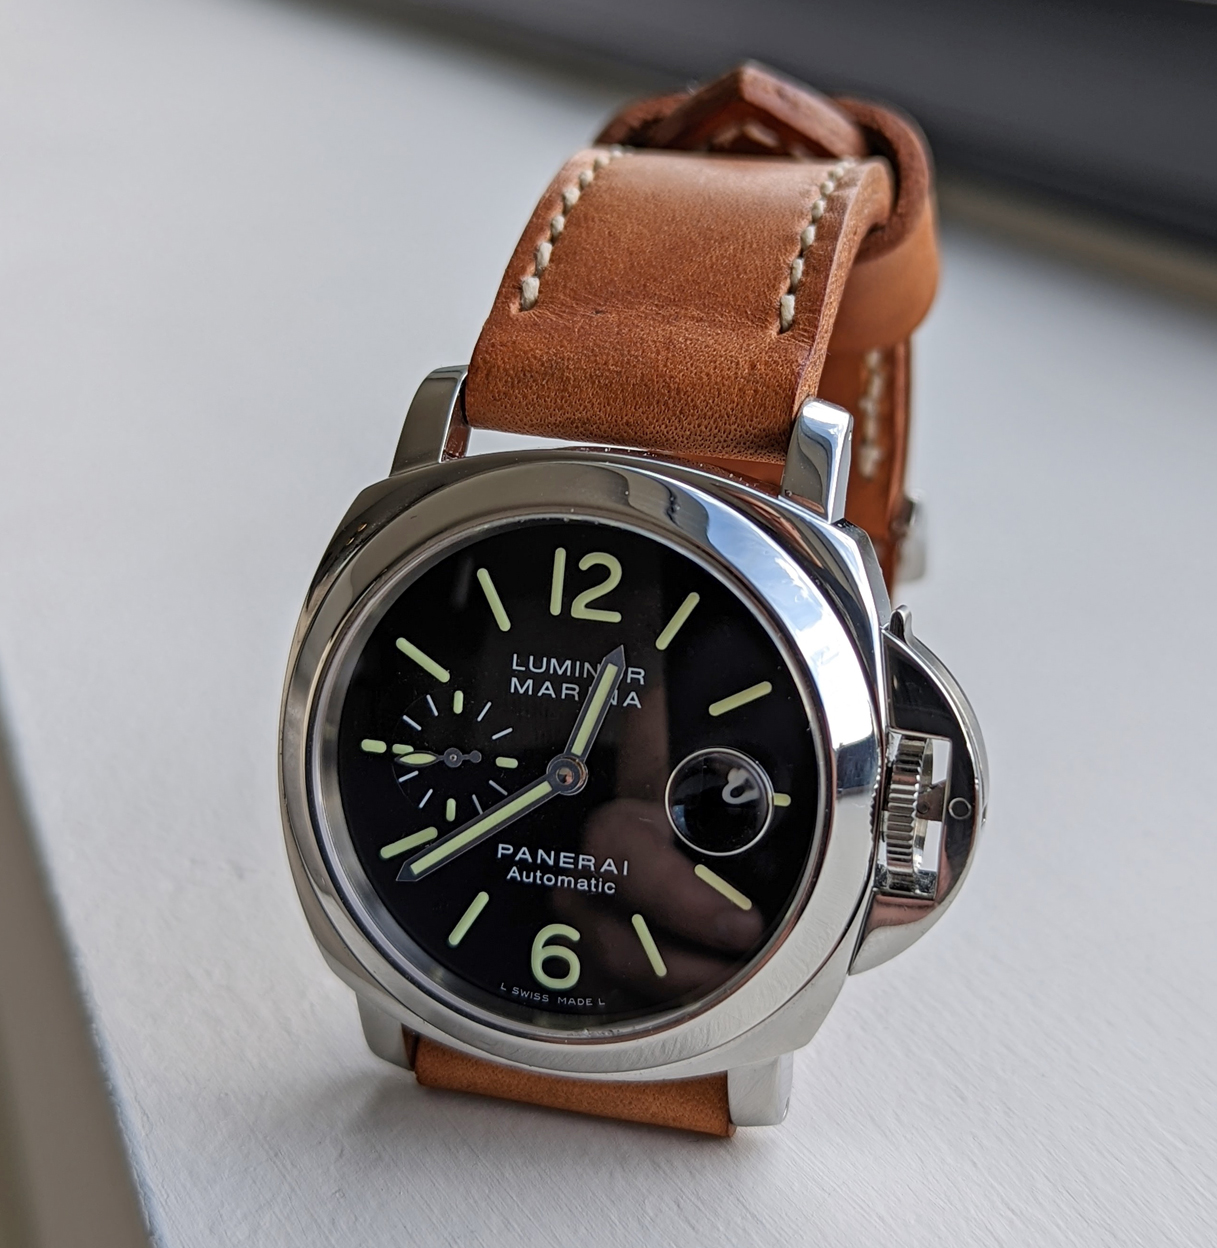 Panerai 104 on Conker leather with natural stitching. © David Blackie